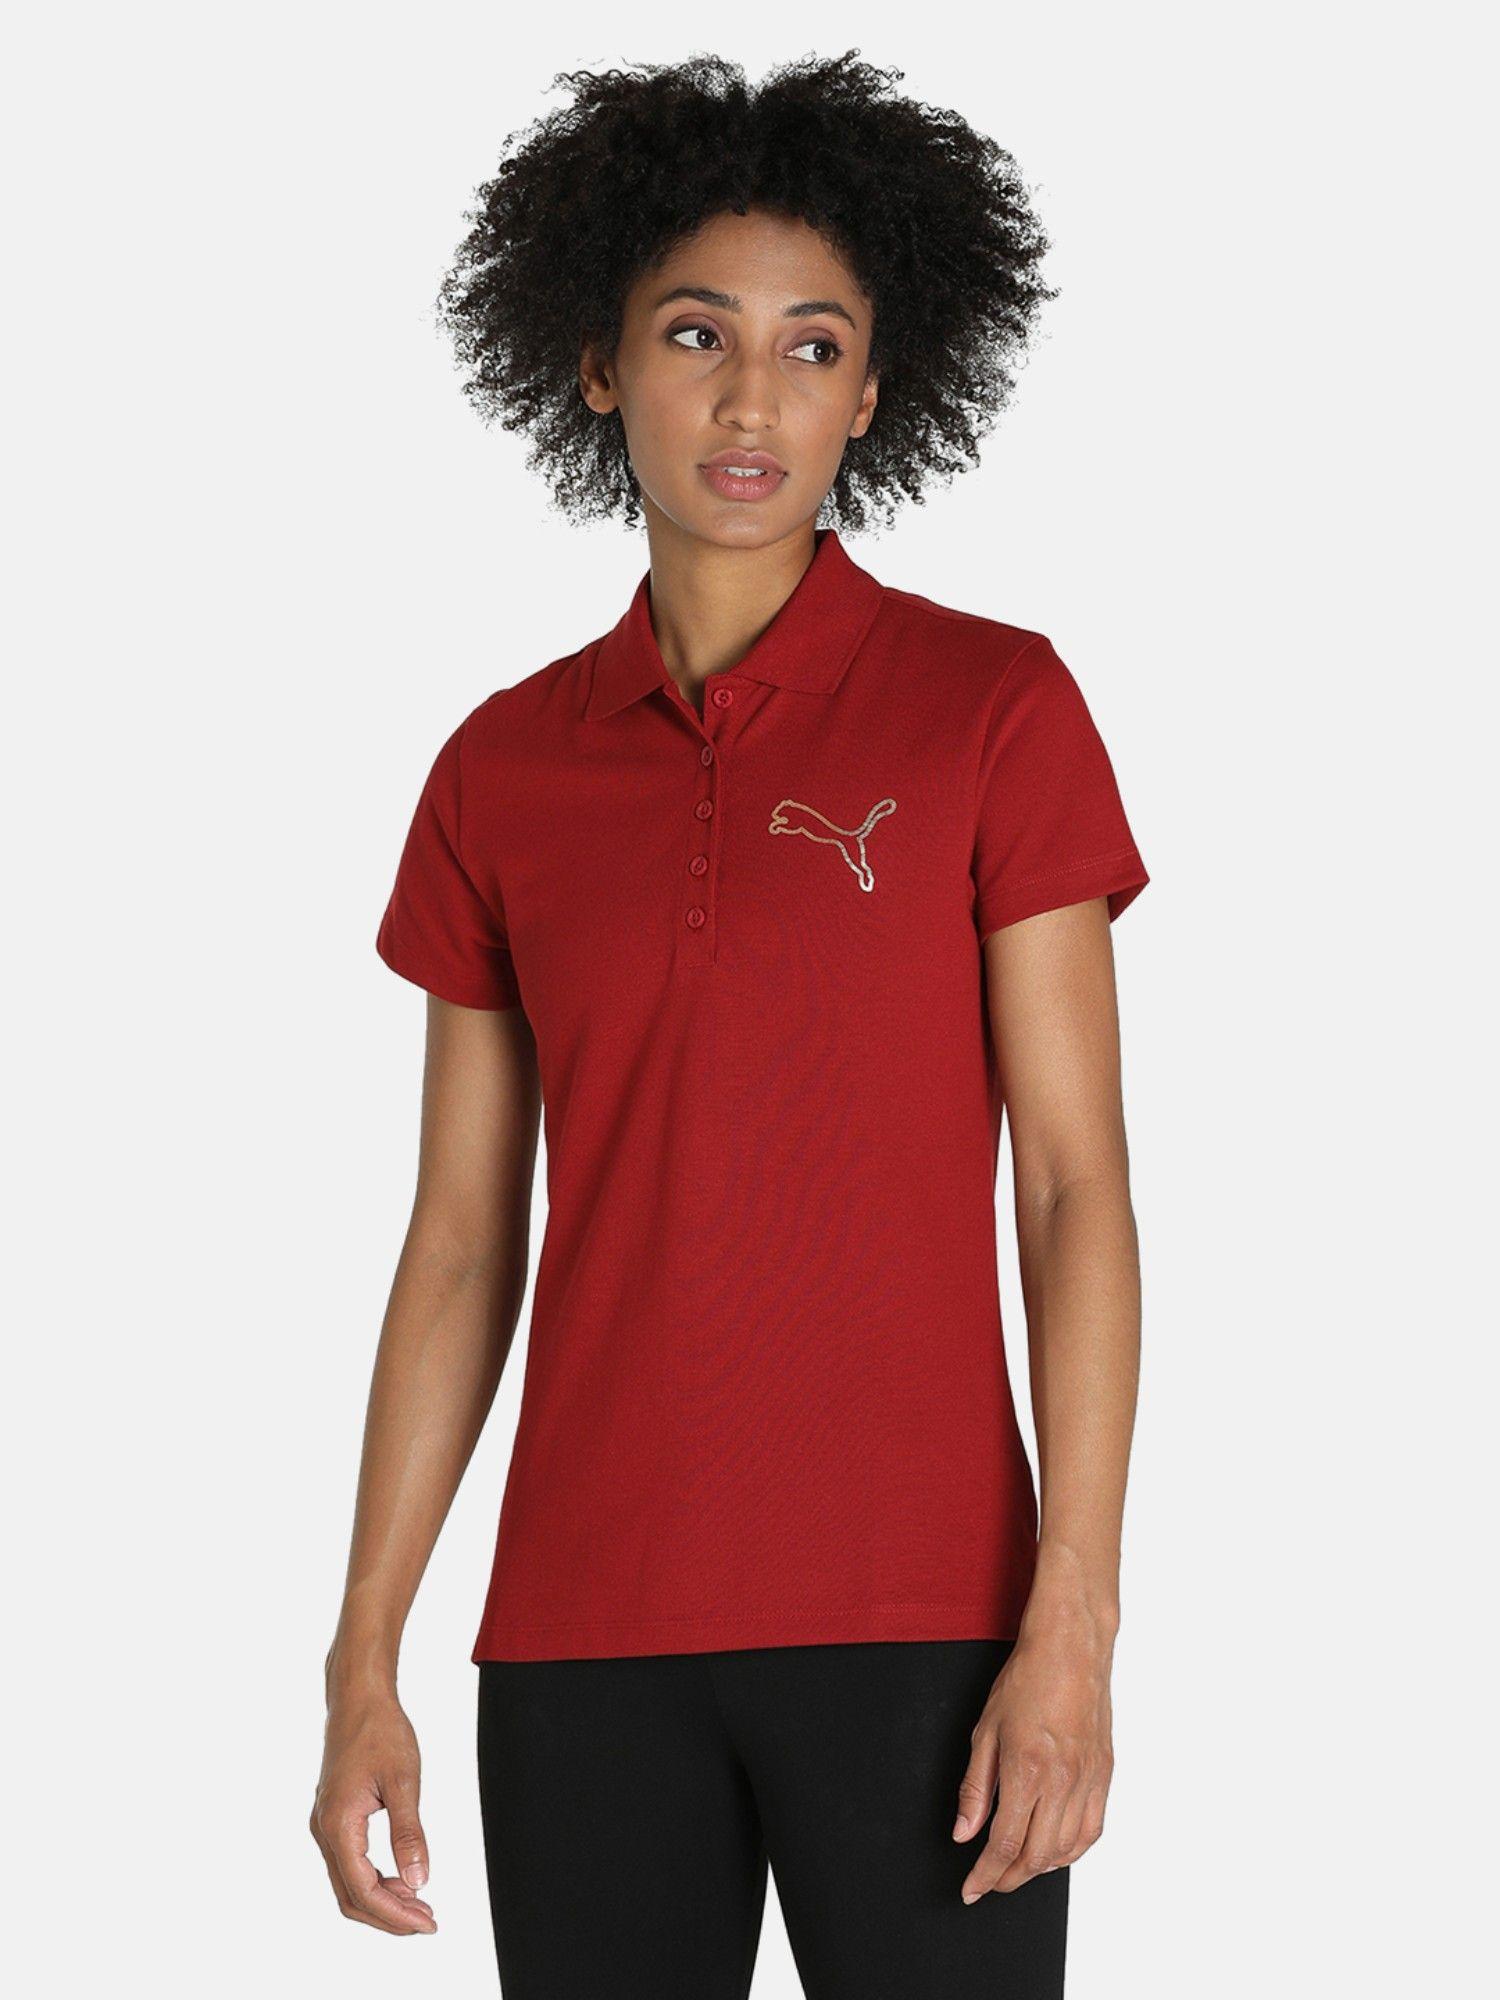 graphic cat women red polo t-shirt